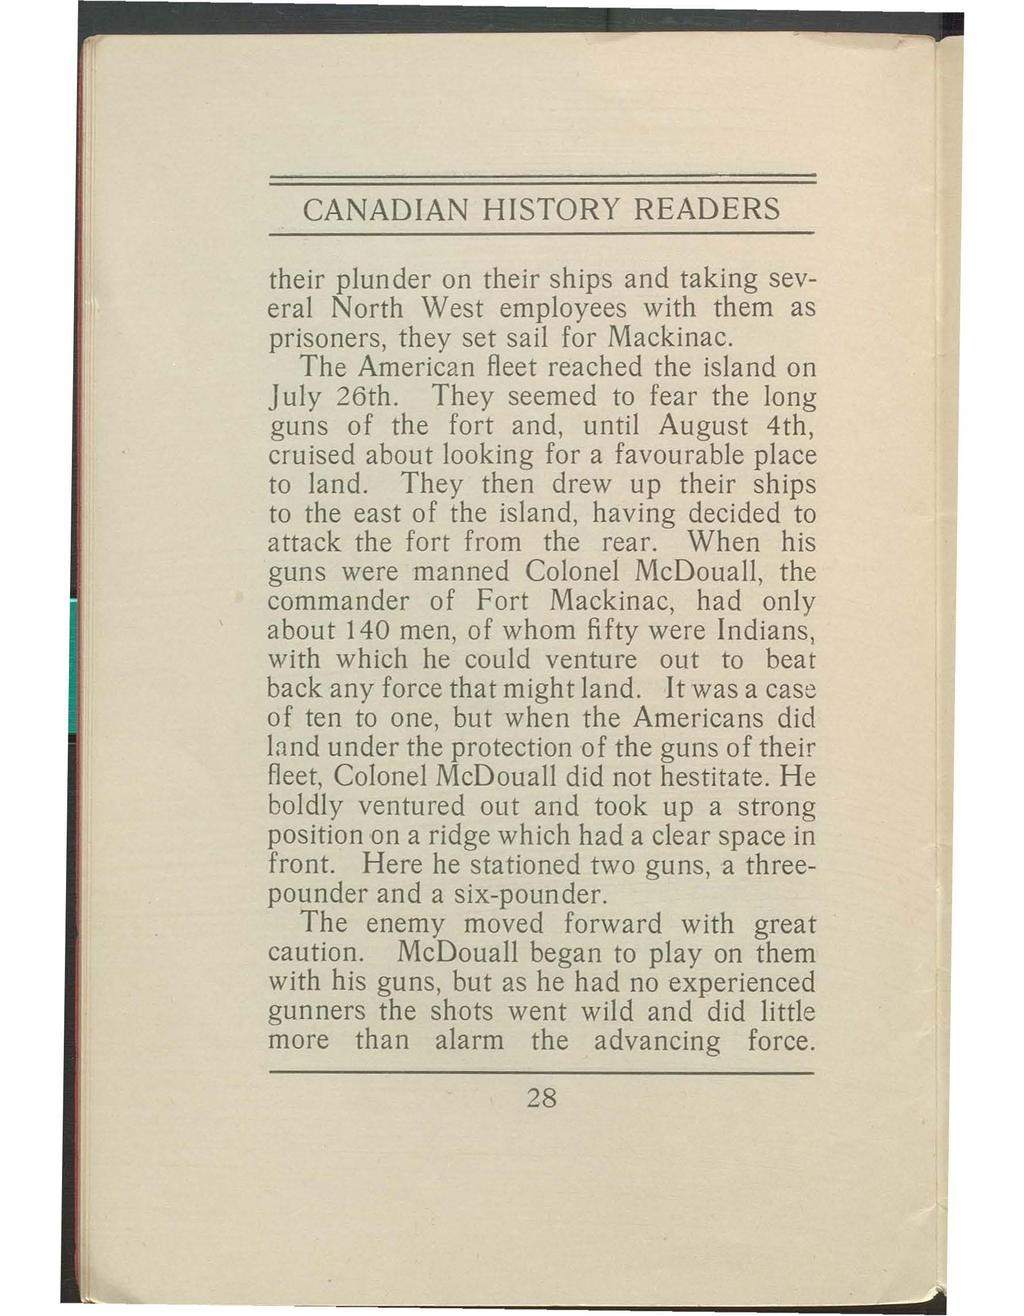 CANADIAN HISTORY READERS their plunder on their ships and taking several North West employees with them as prisoners, they set sail for Mackinac. The American fleet reached the island on July 26th.